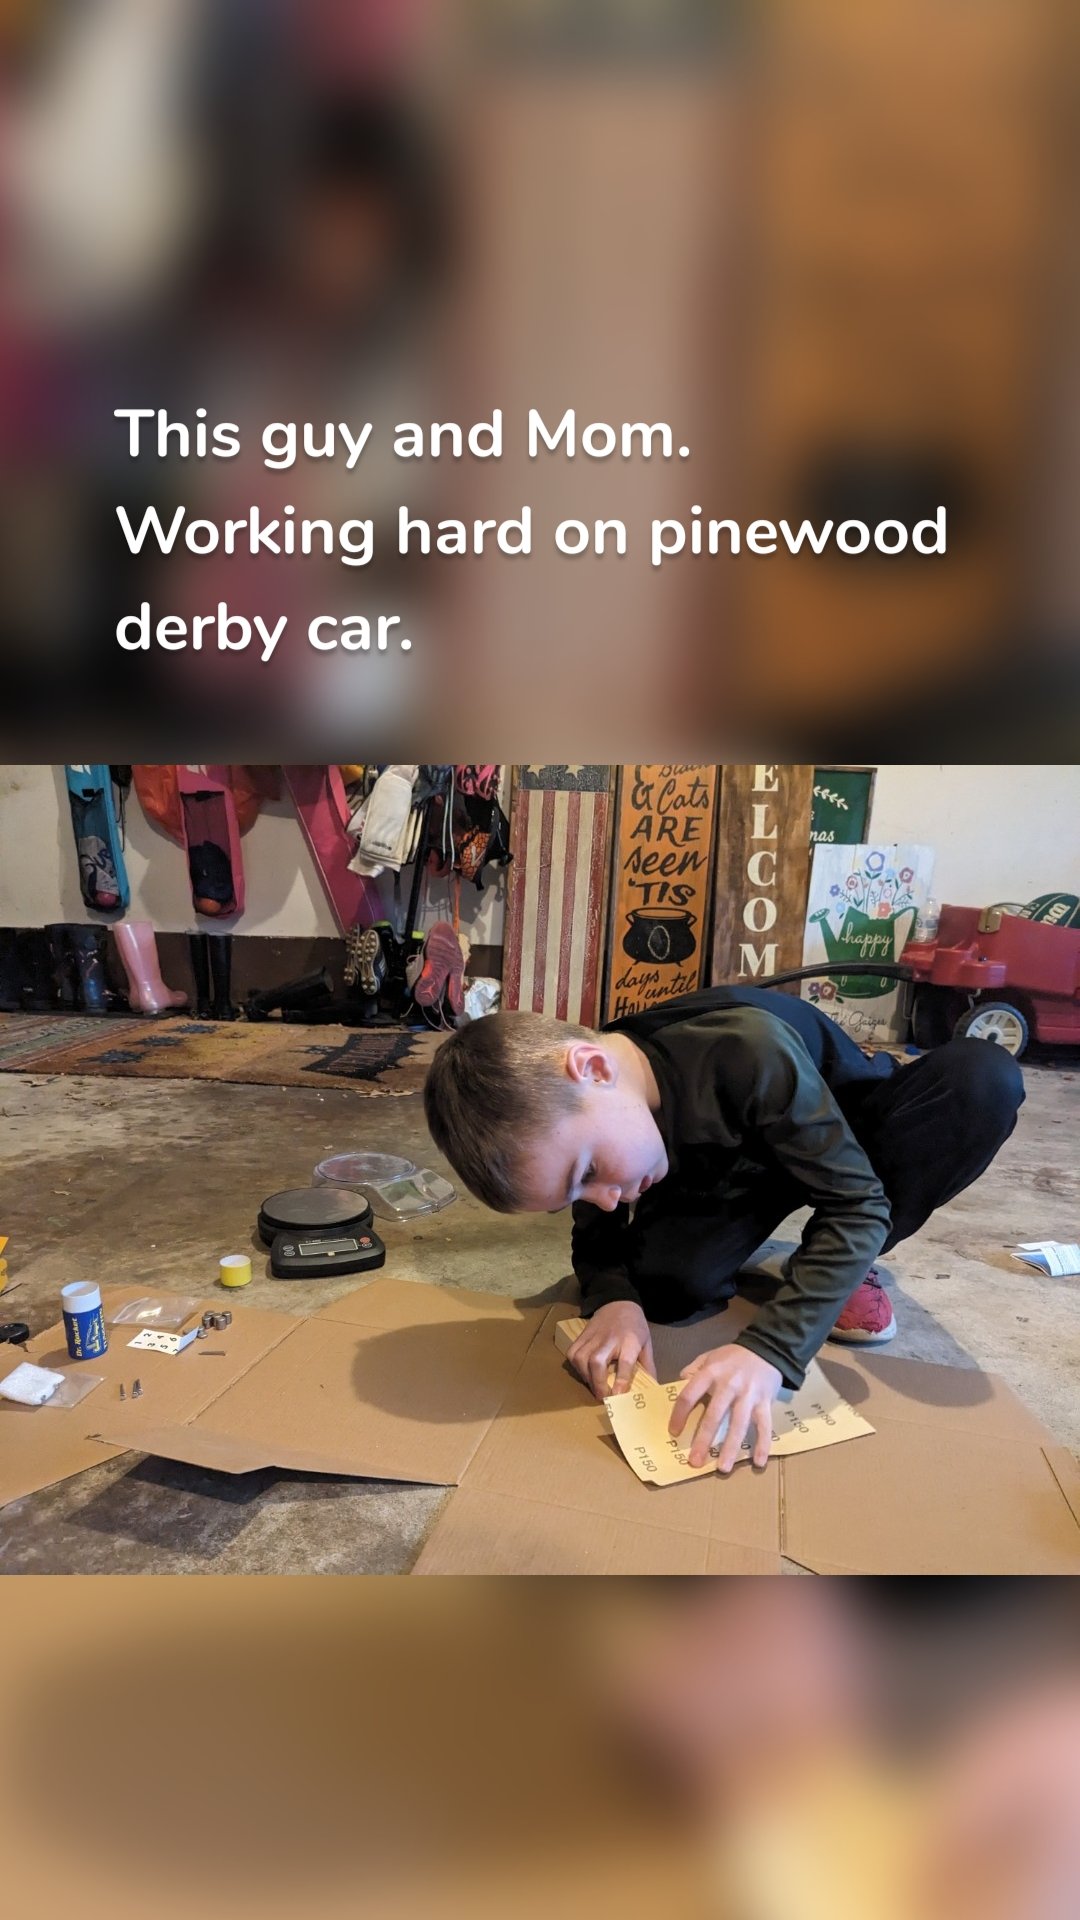 This guy and Mom. Working hard on pinewood derby car.